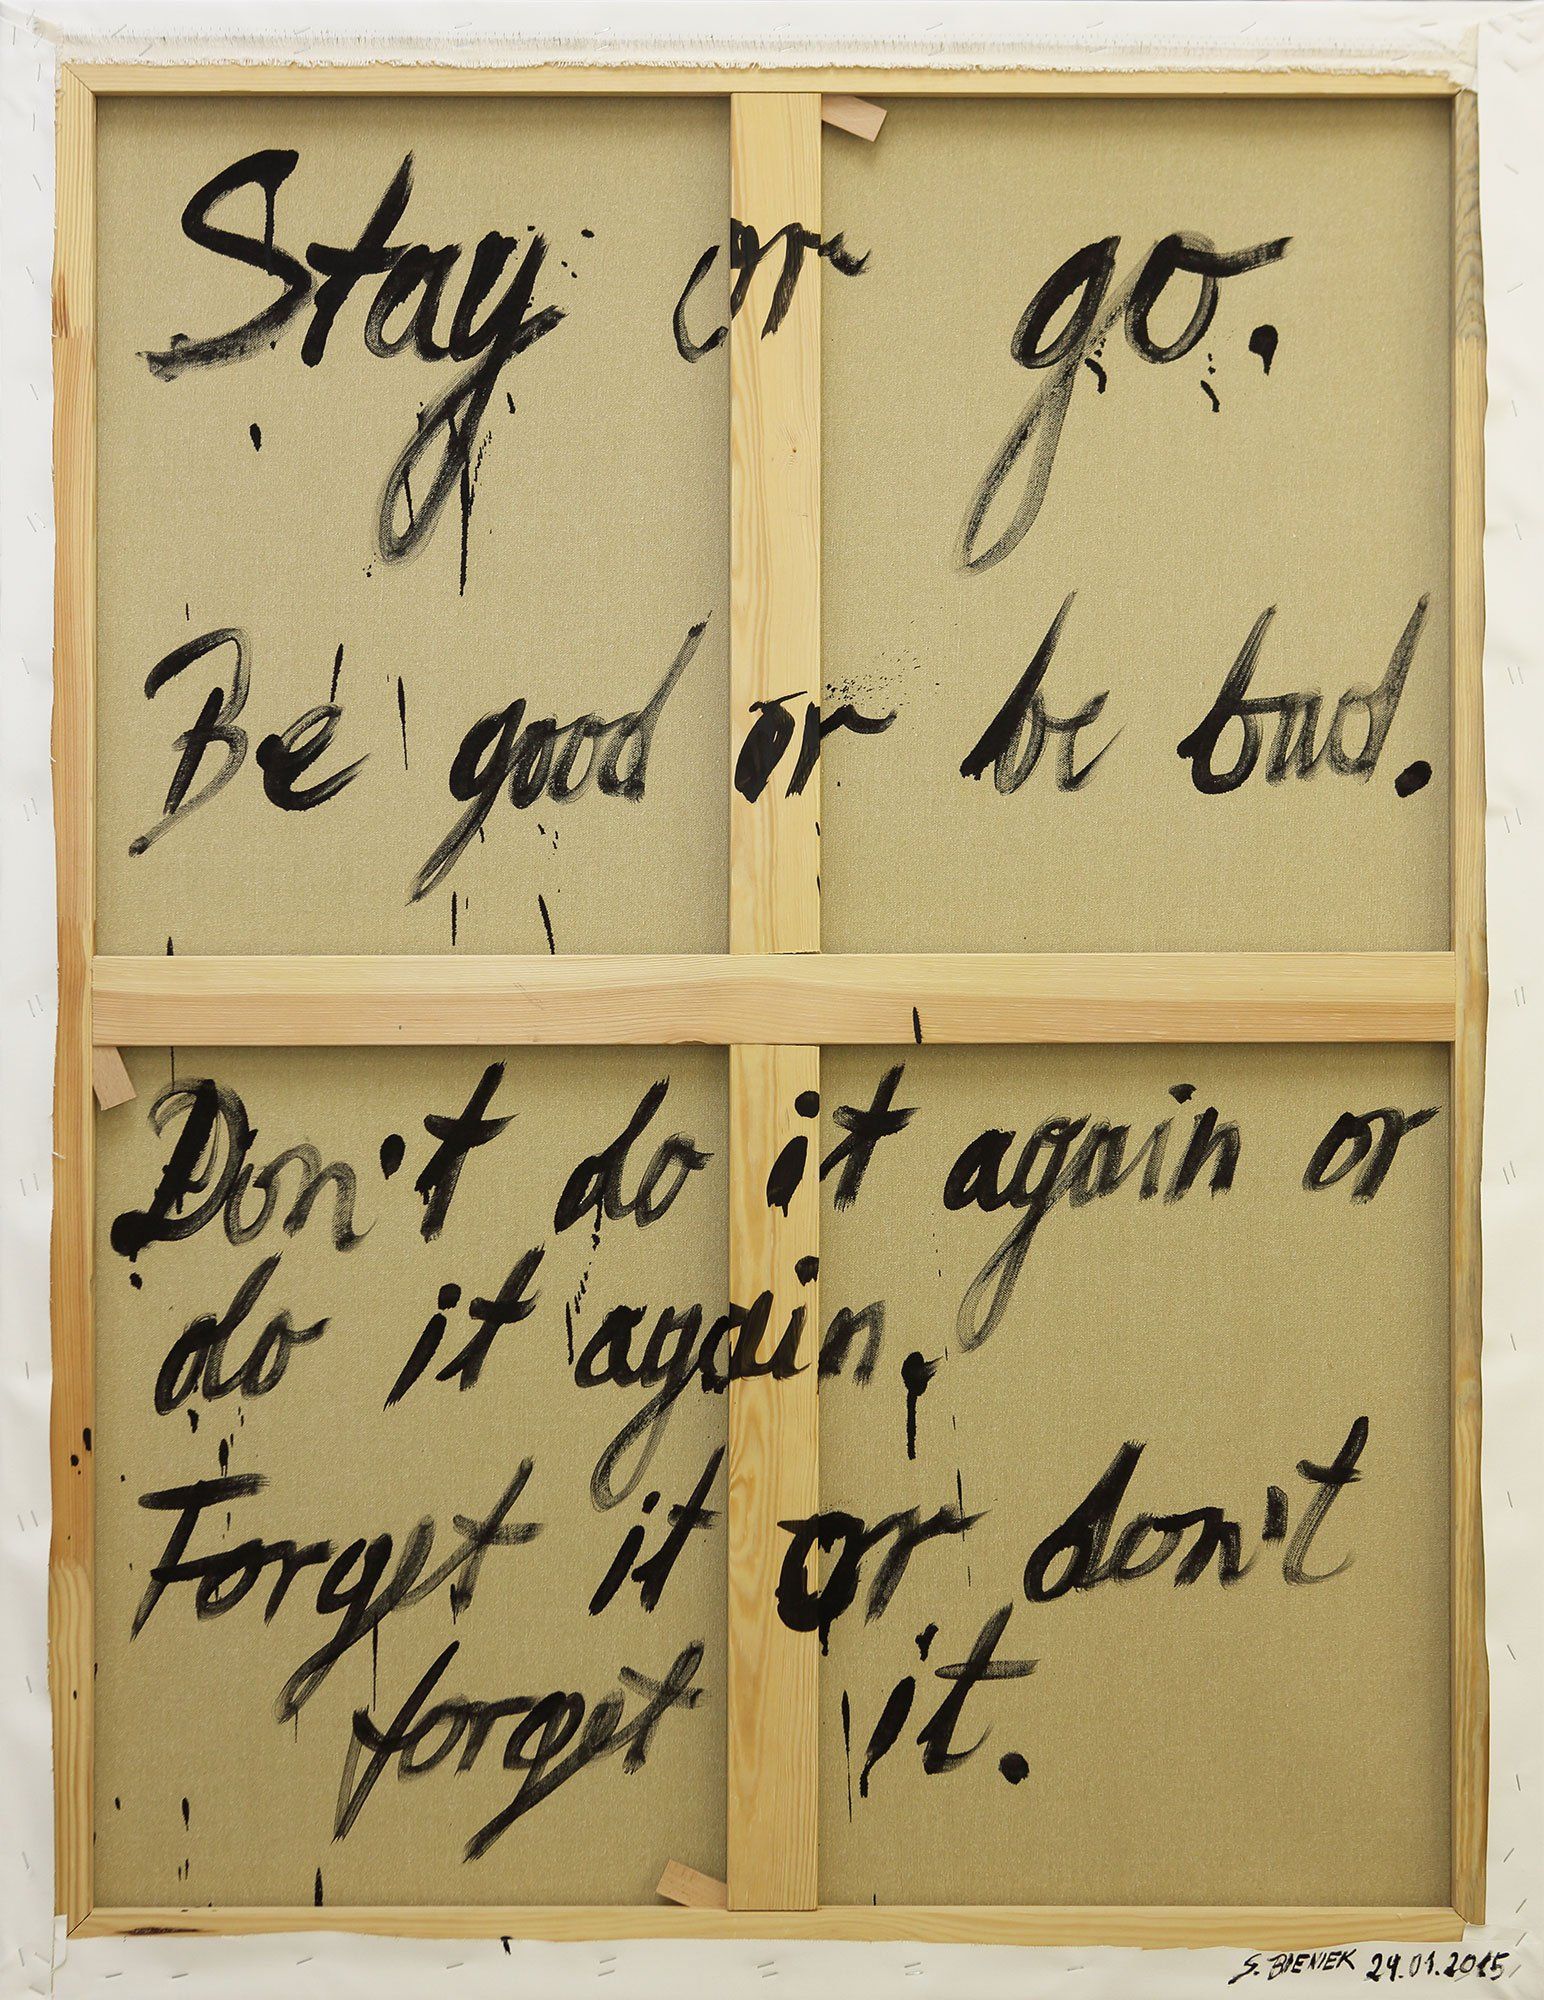 „Good Advices“(Stay or go. Be good or be bad. Don't do it again or do it again. Forget it or don't forget it) by Sebastian Bieniek (B1EN1EK), 2015. Oil on back of canvas. 120 cm. x 90 cm. From the oeuvre of Bieniek-Text and part of the 